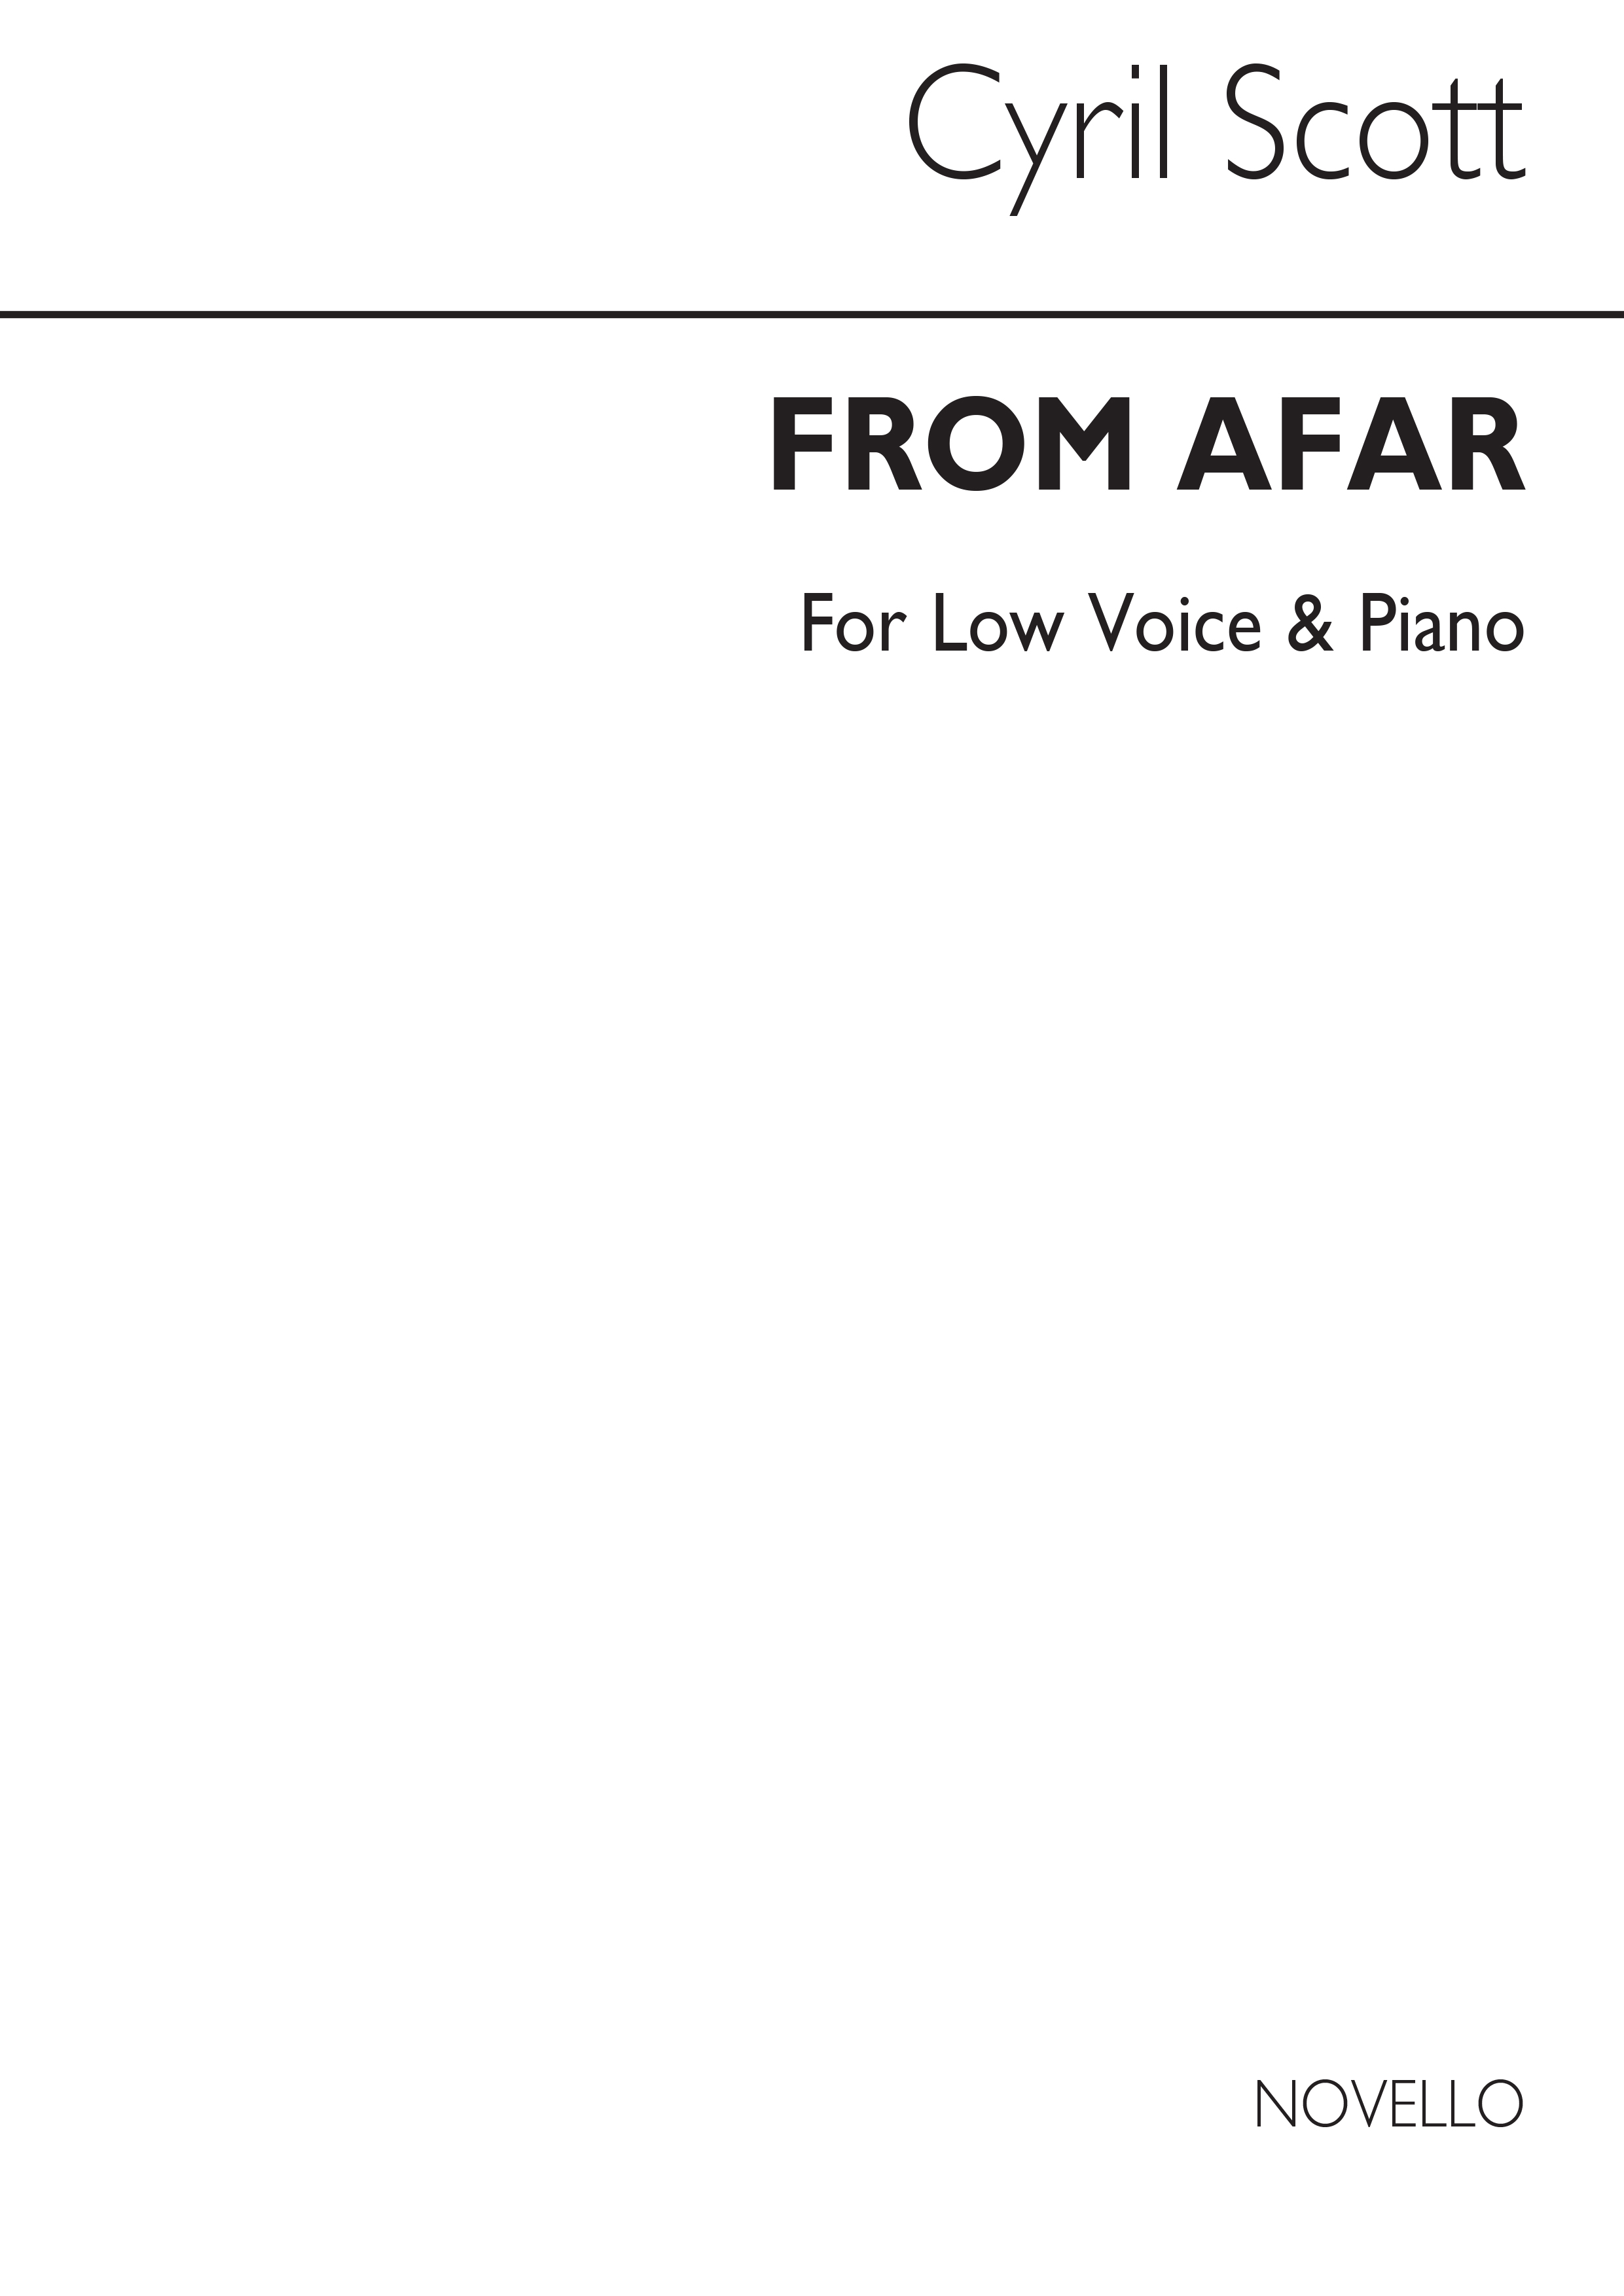 Cyril Scott: From Afar (D'outremer)-low Voice/Piano (Key-c)